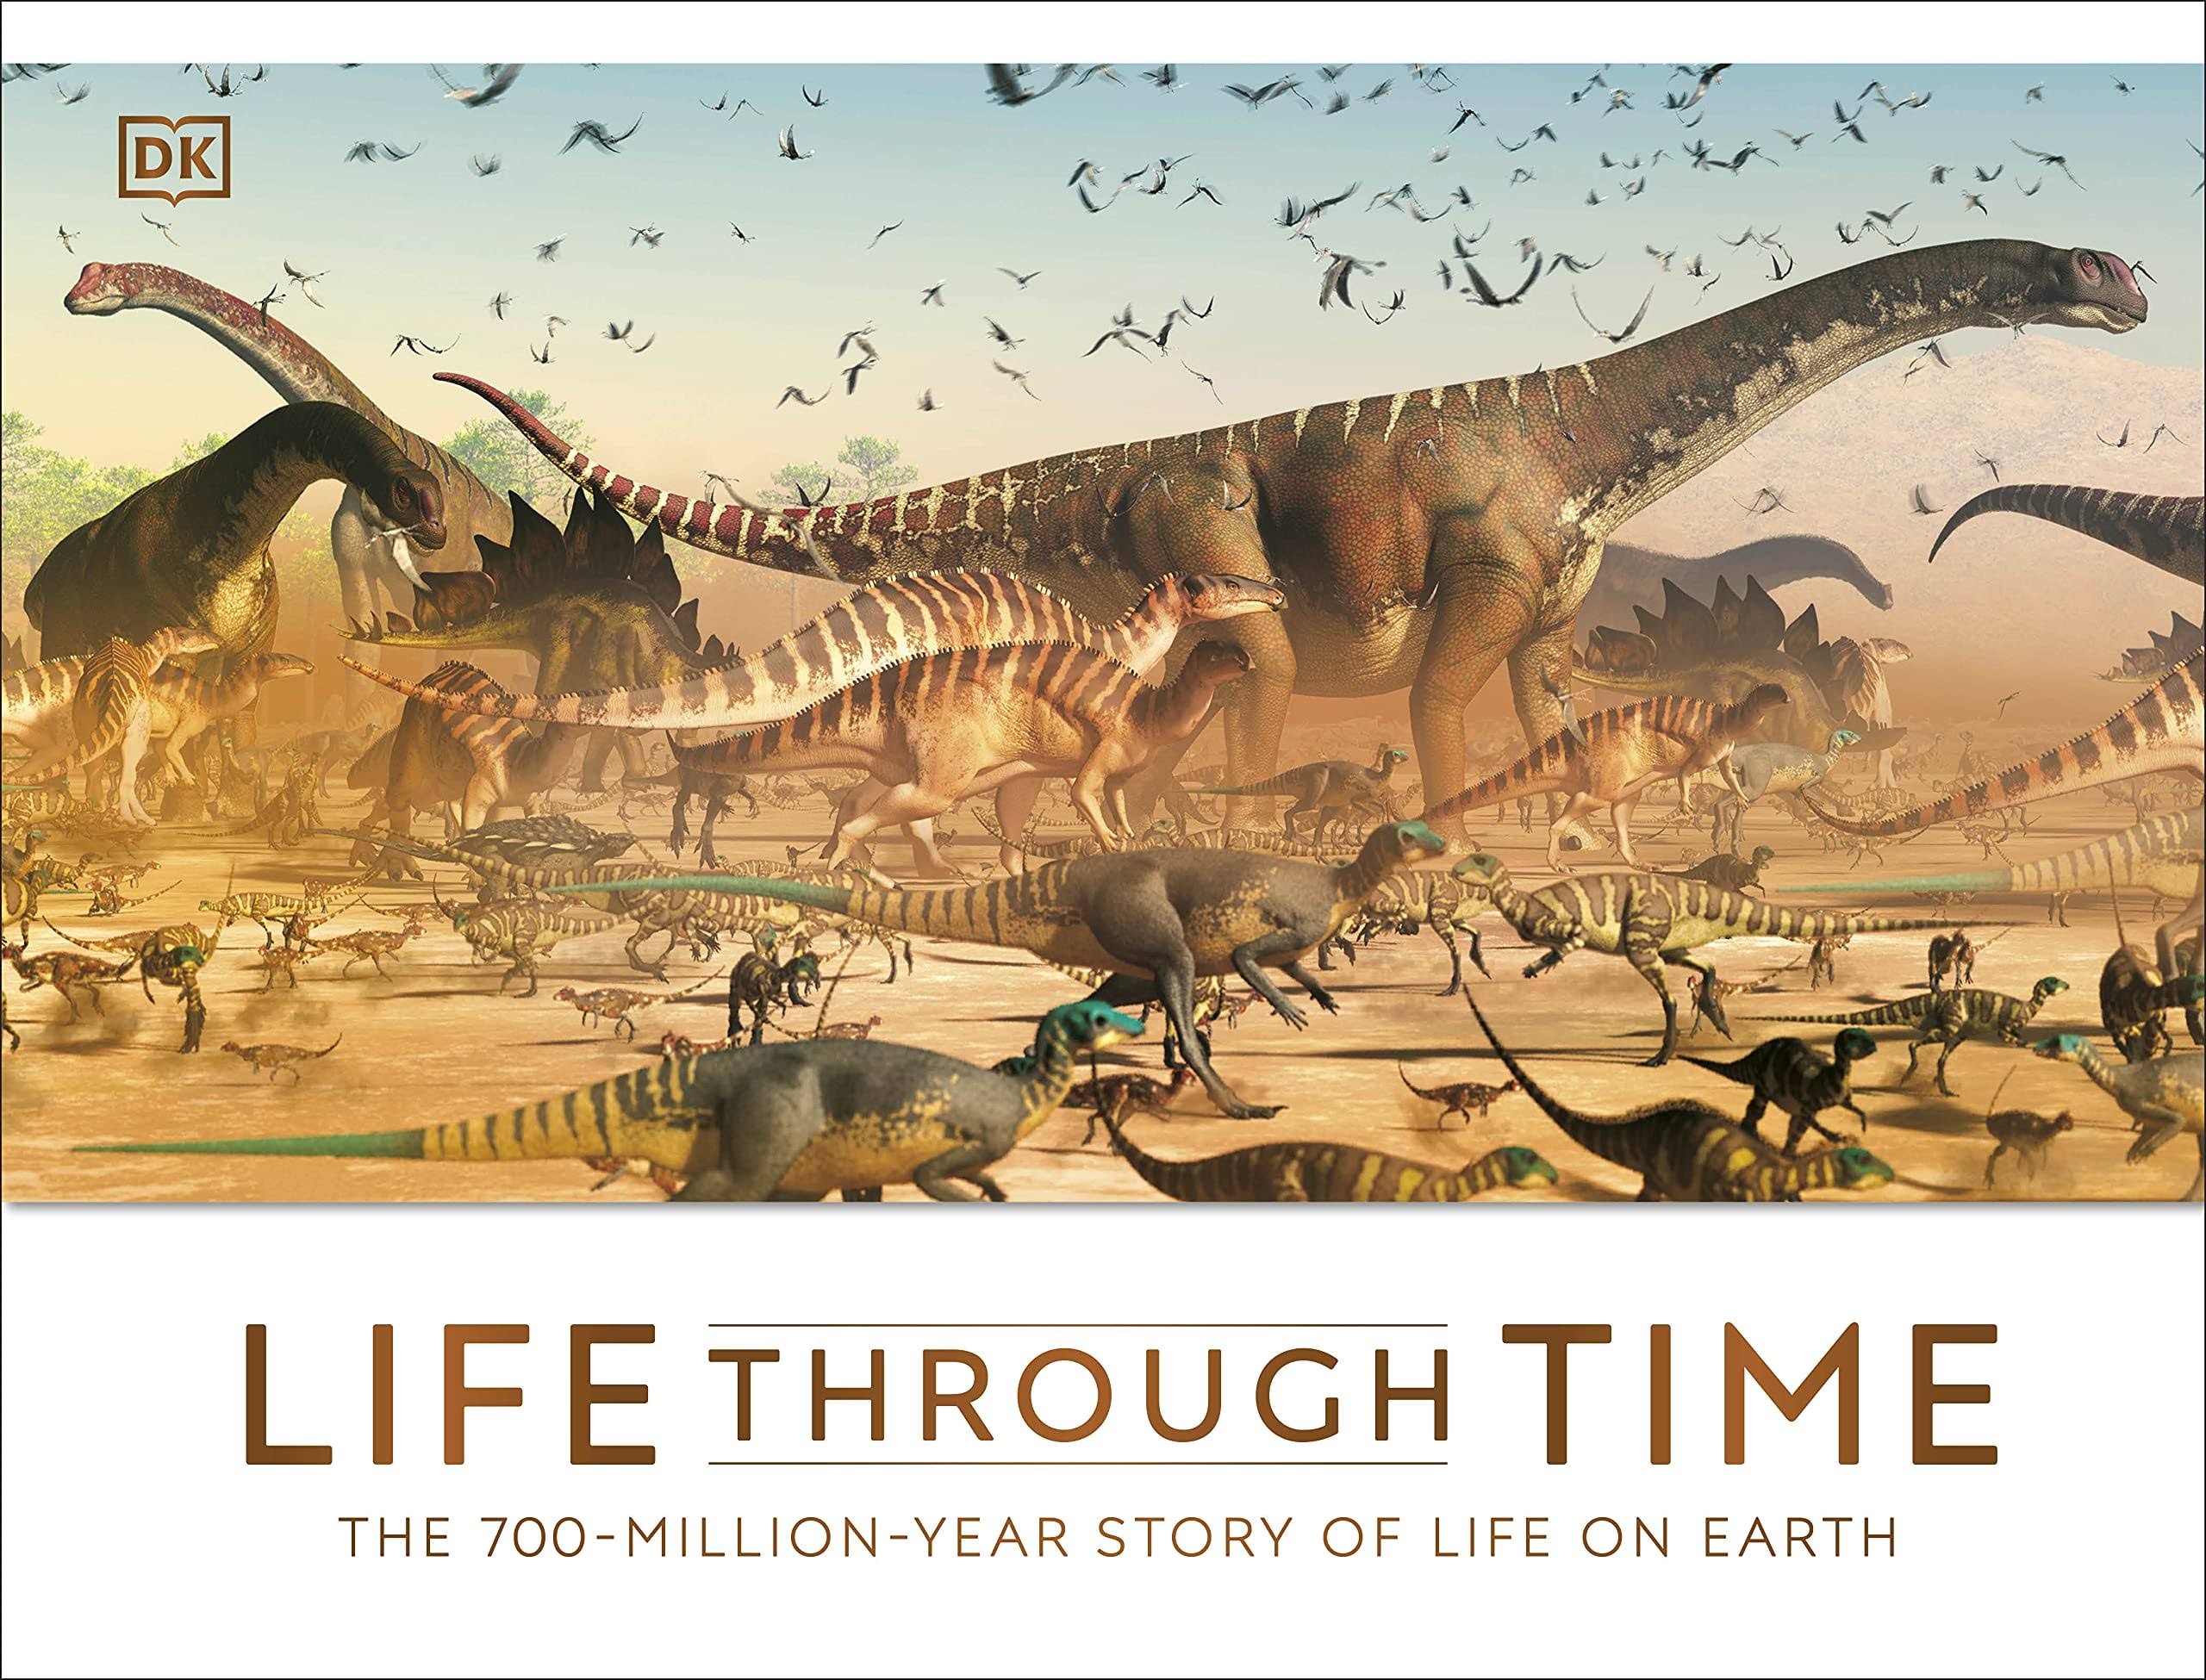 Life Through Time: A Four-Billion-Year Journey Exploring Life on Earth [Book]